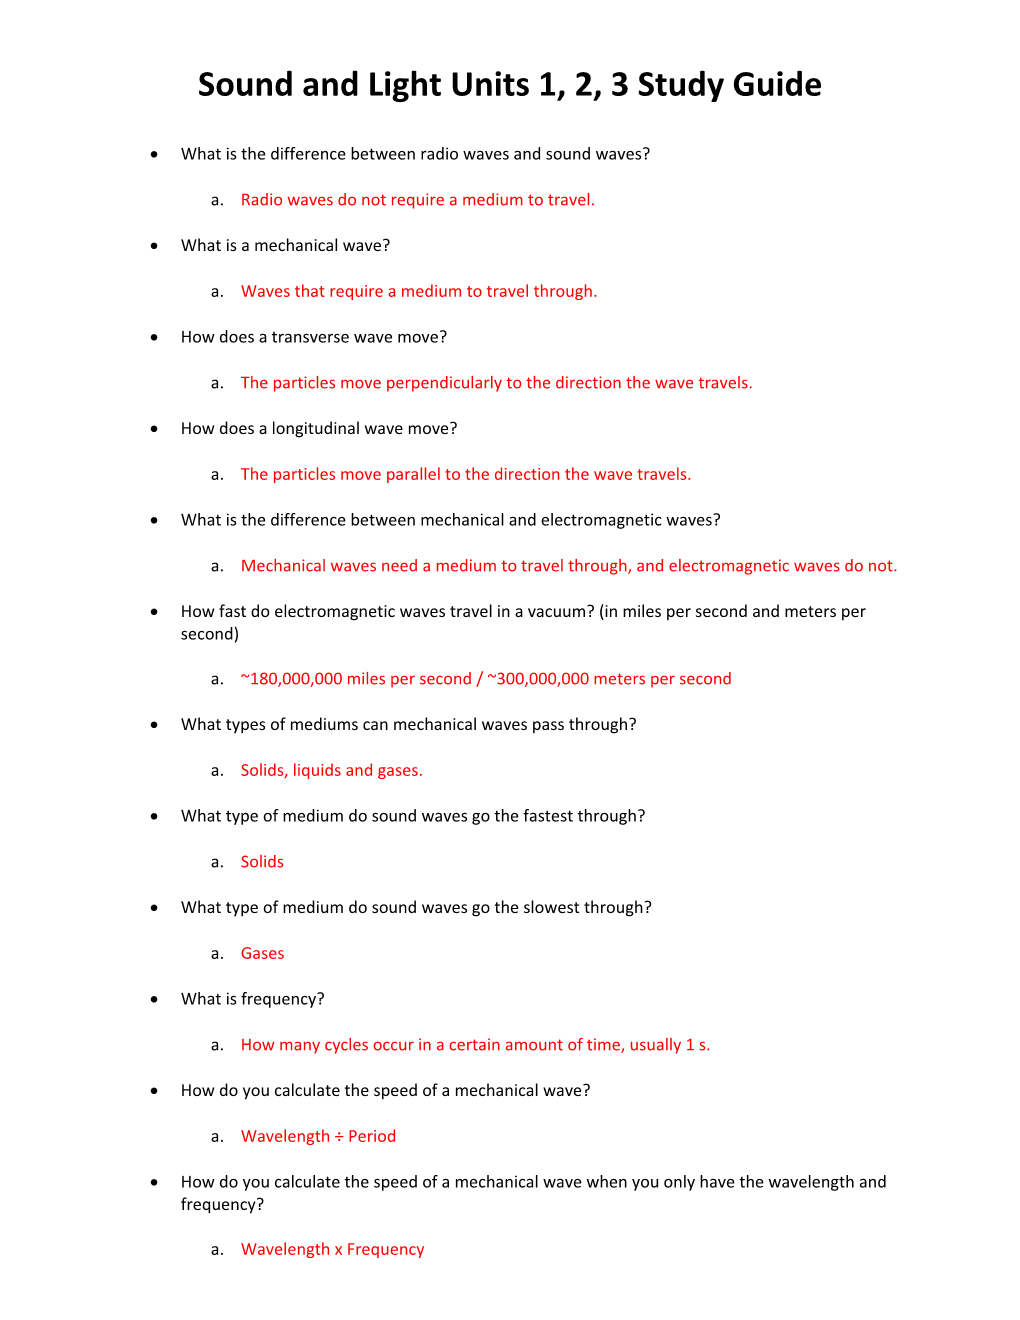 Sound and Light Units 1, 2,3 Study Guide